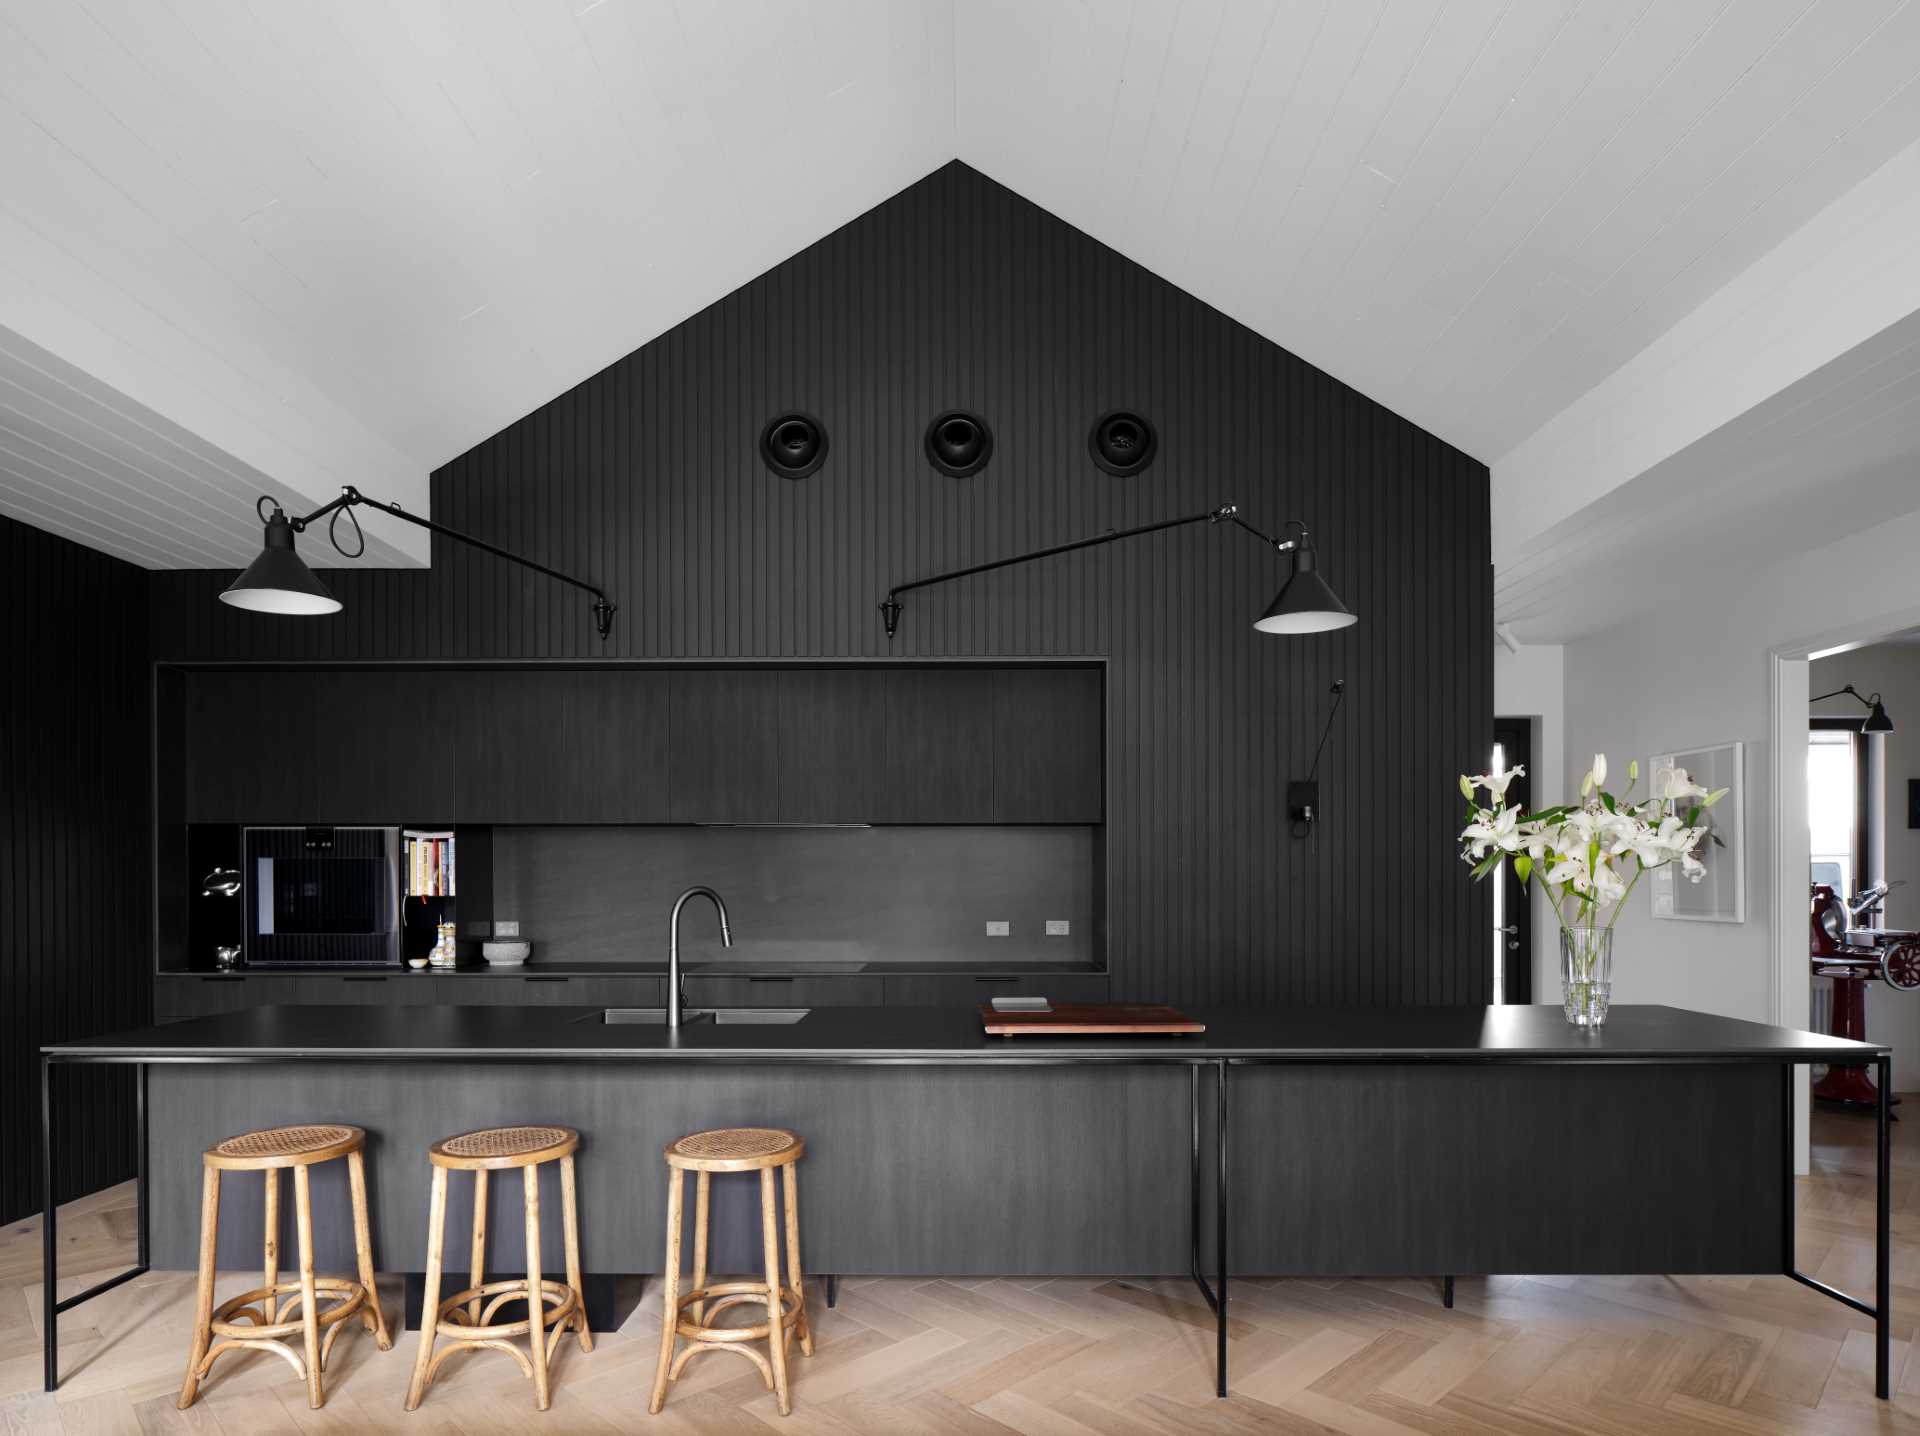 The striking black kitchen facilitates the owners’ love for cooking and entertaining and includes hardware-free cabinets, black appliances, black countertops, and a matching long island with black kitchen faucet and sink.